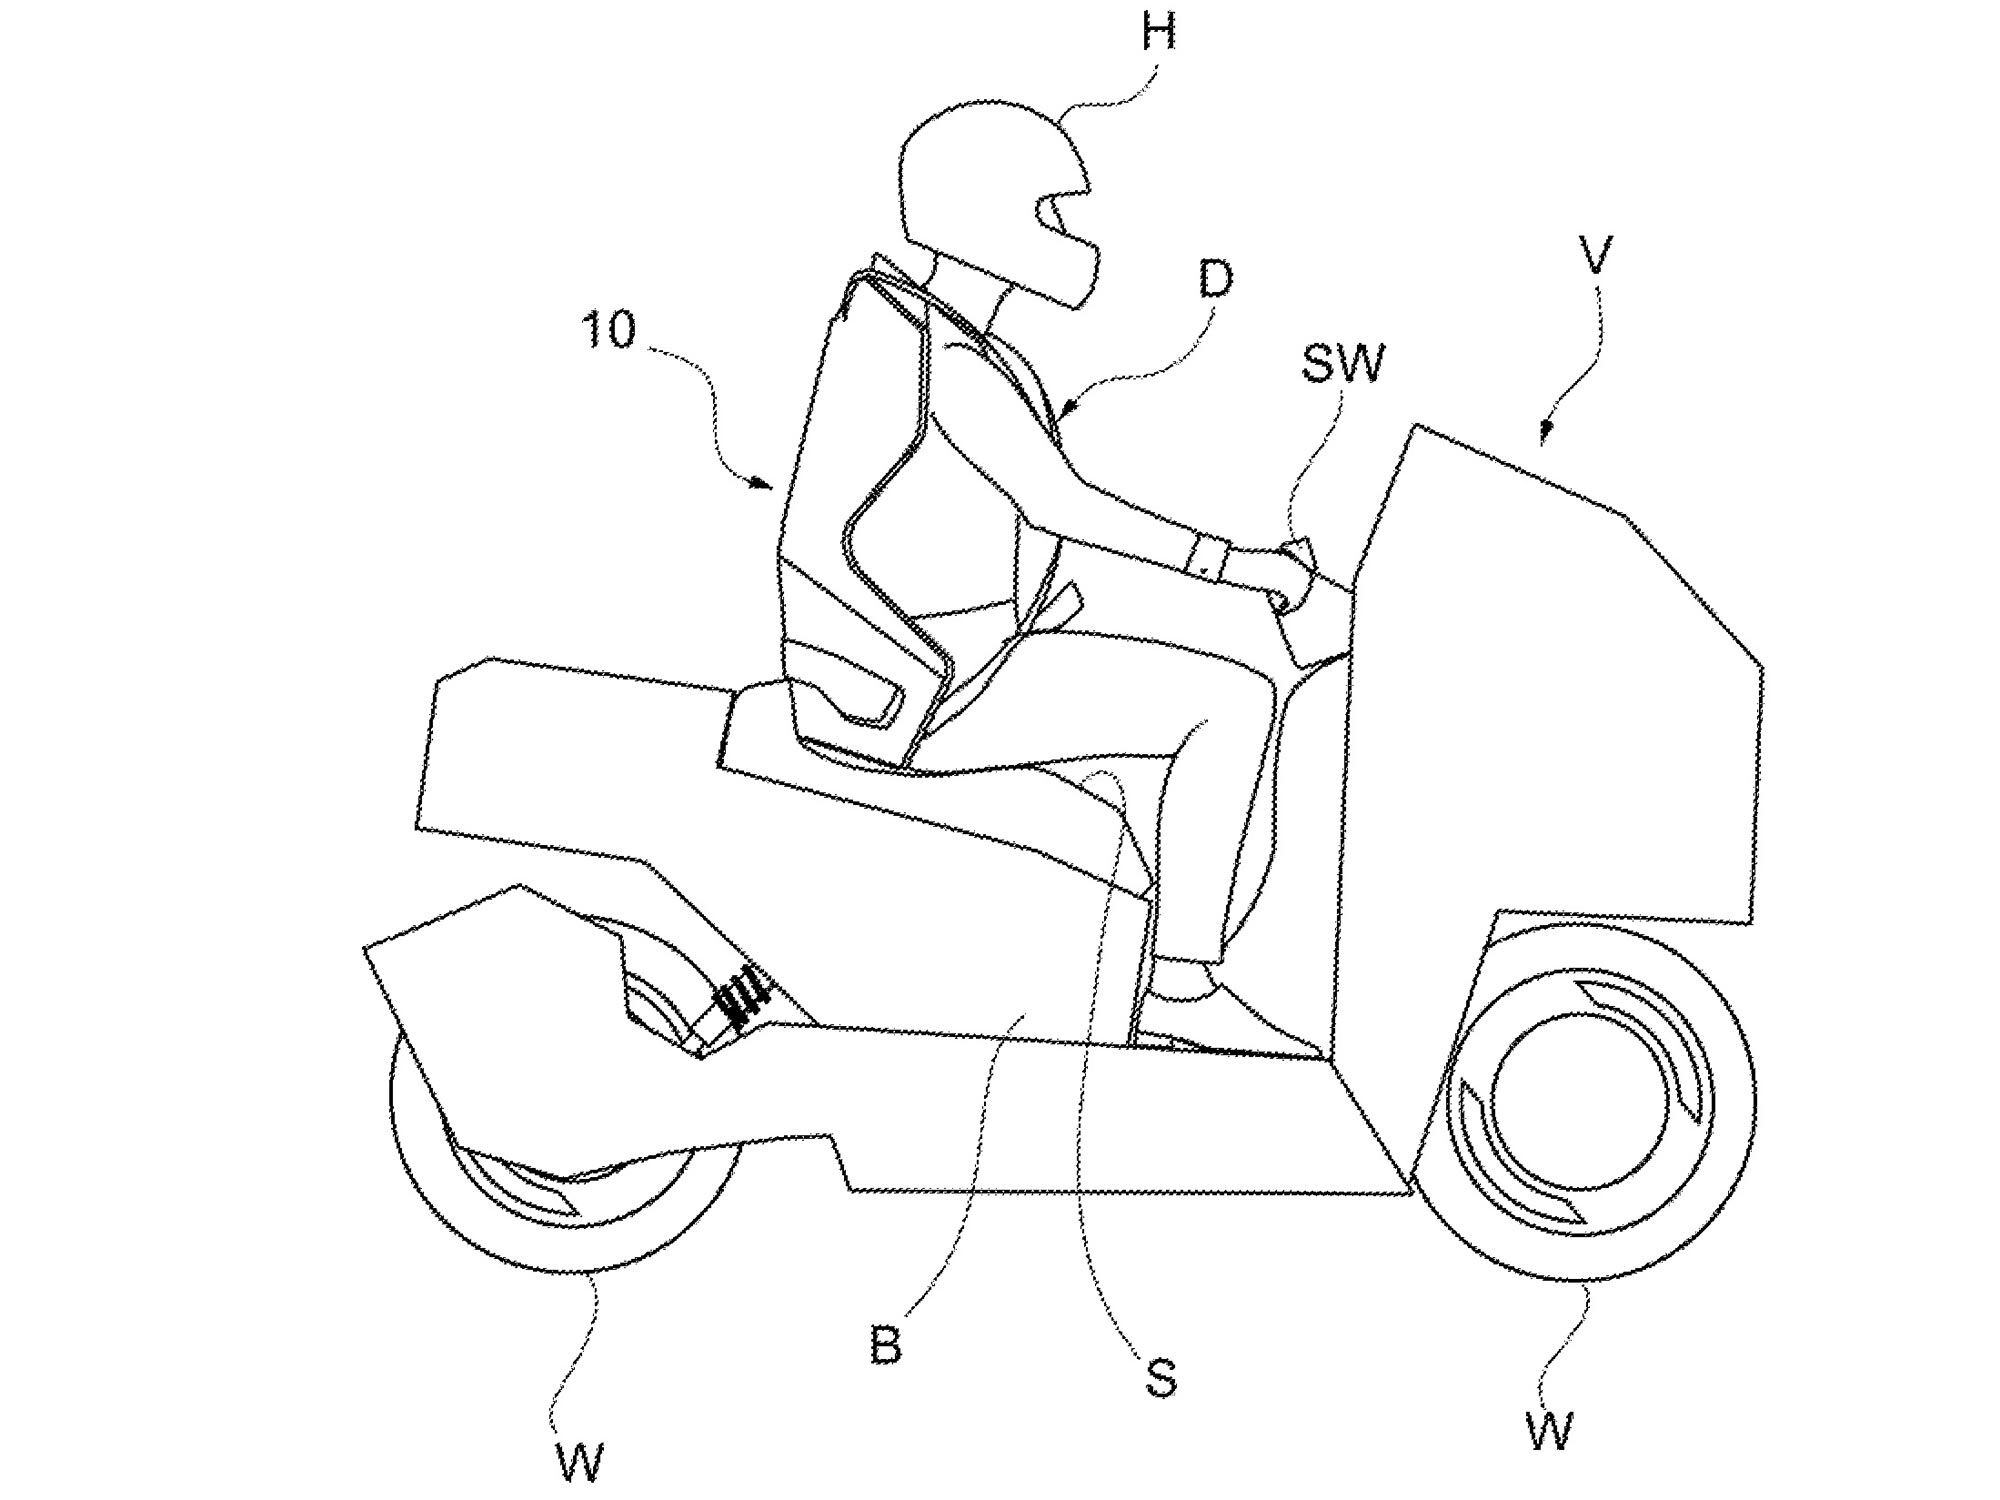 Italdesign’s new seatbelt patent would likely make most sense for scooter applications.